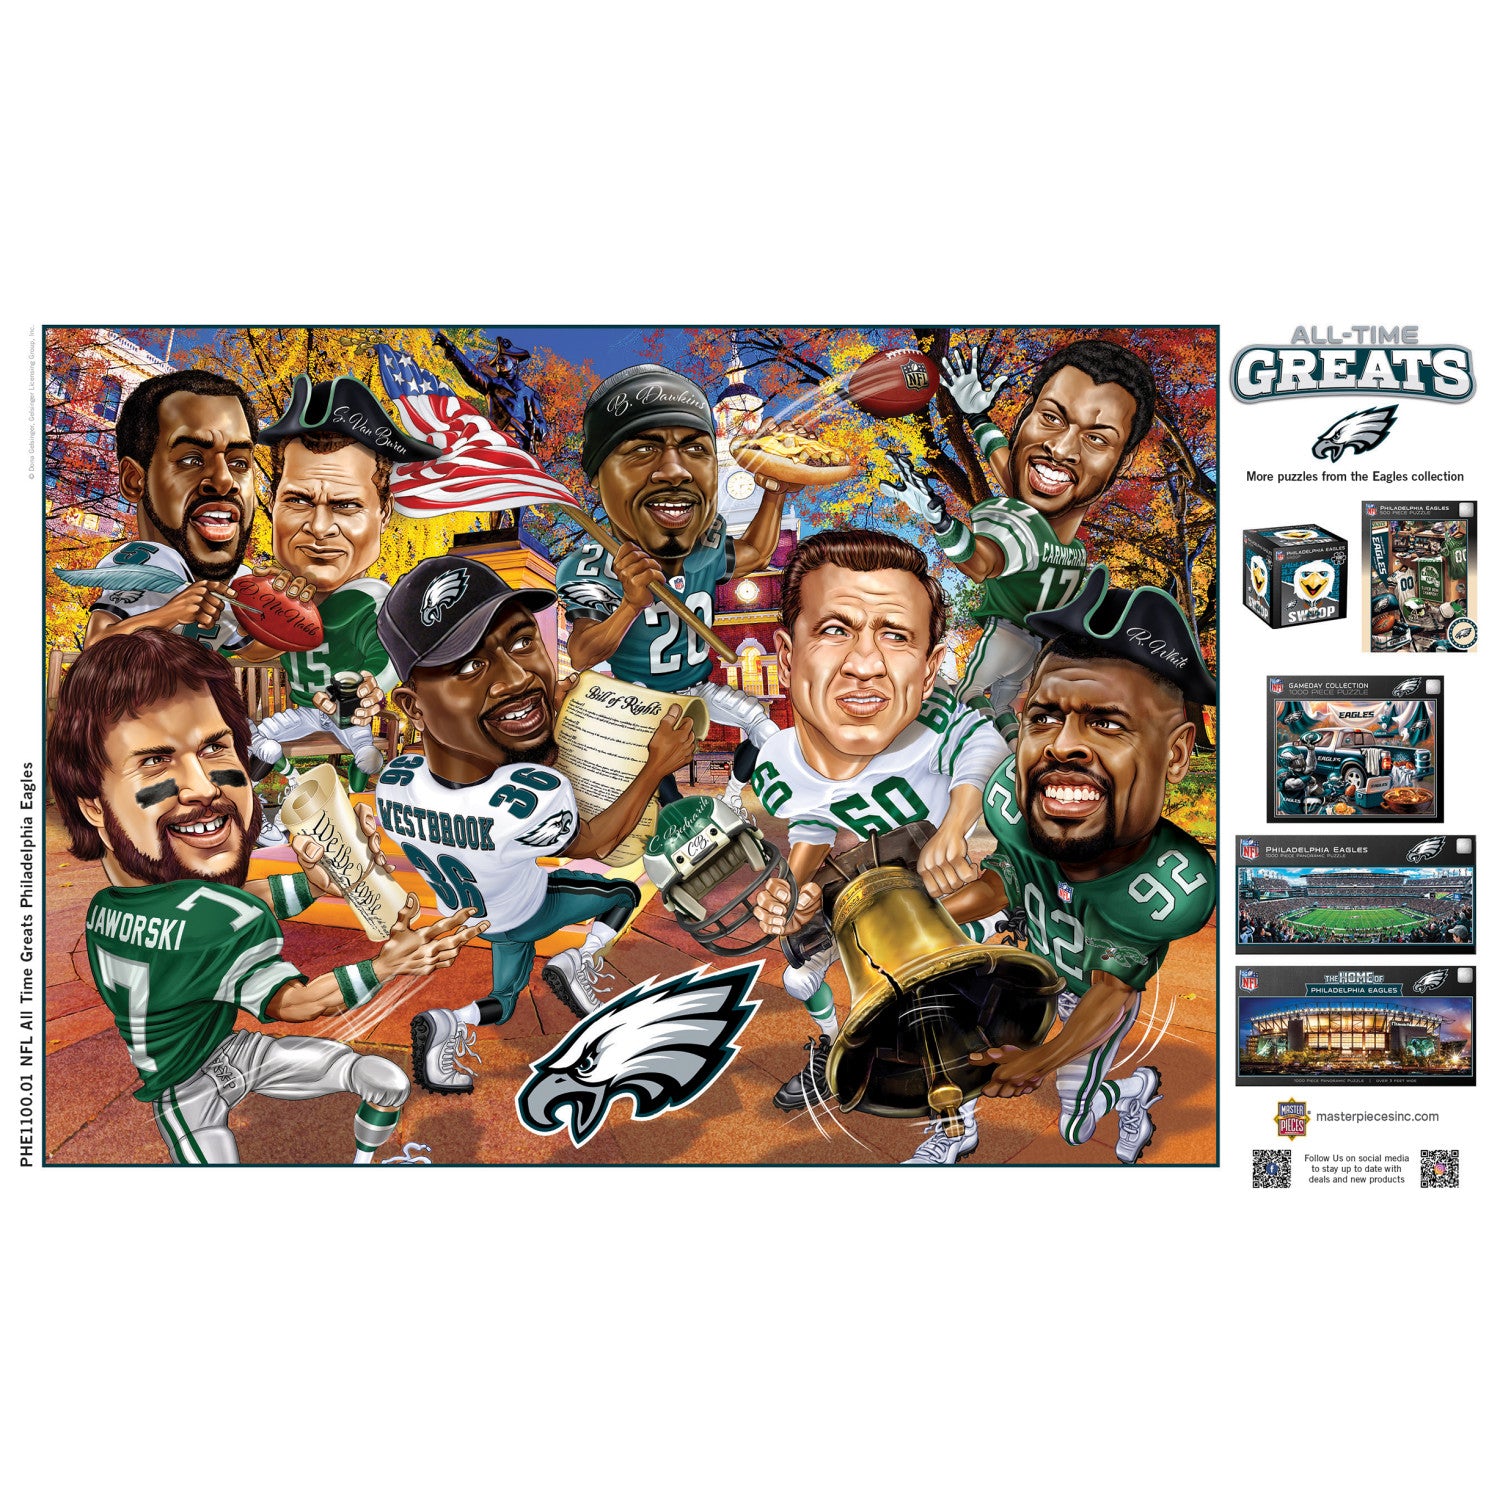 Philadelphia Eagles - All Time Greats 500 Piece Jigsaw Puzzle